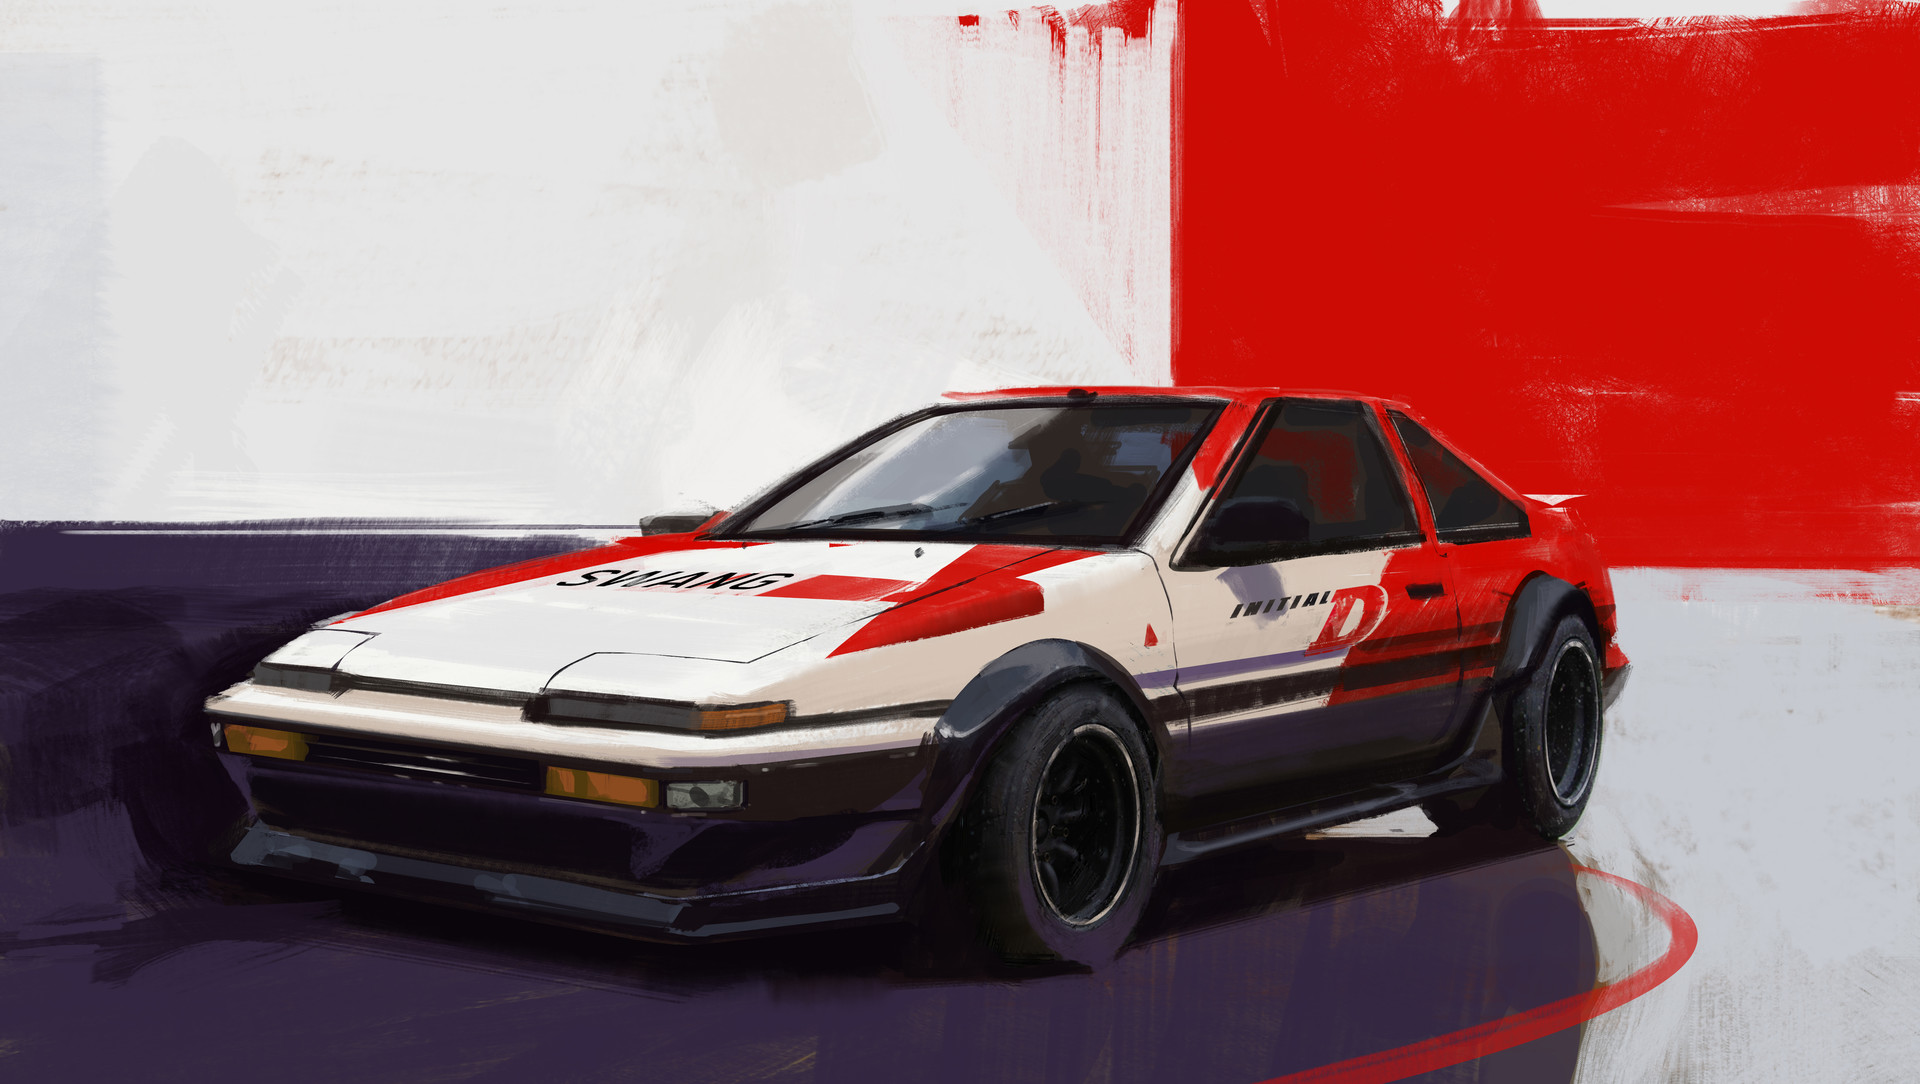 General 1920x1084 Initial D car concept art Toyota AE86 purple red frontal view pop-up headlights sketches Japanese cars